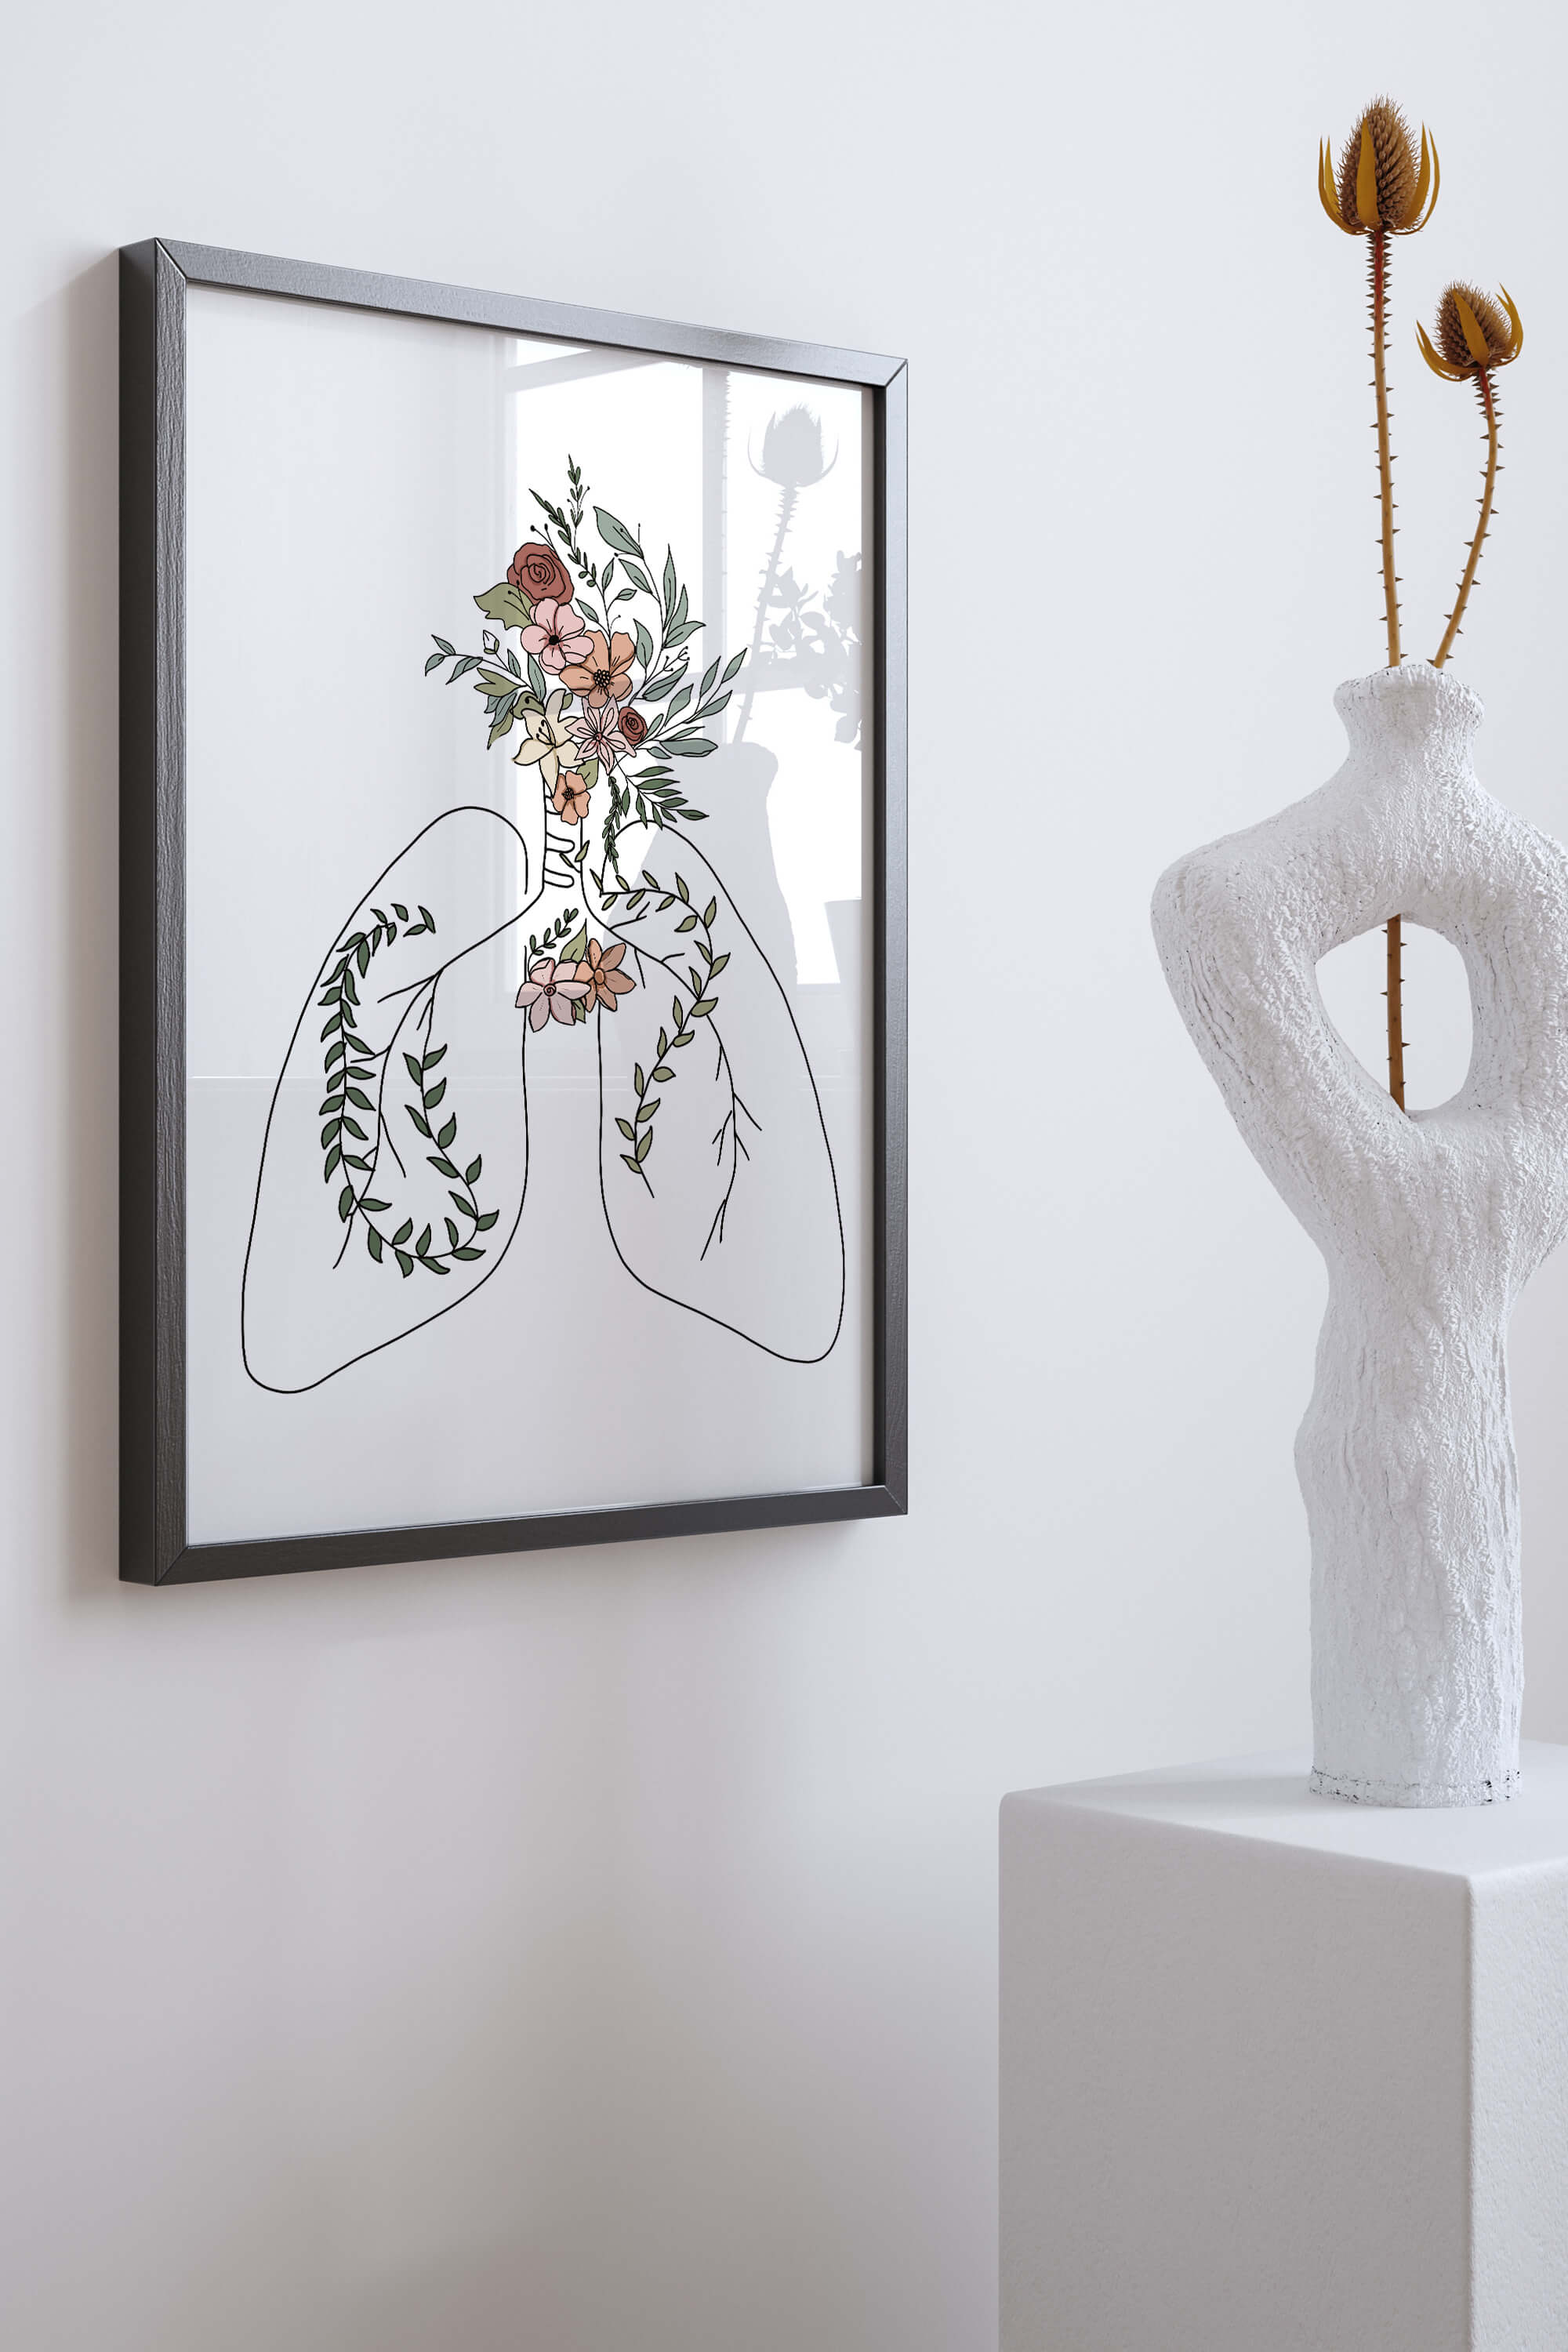 Healing Lungs with Flower Art, supporting cancer survivors with art that reflects their journey and courage.